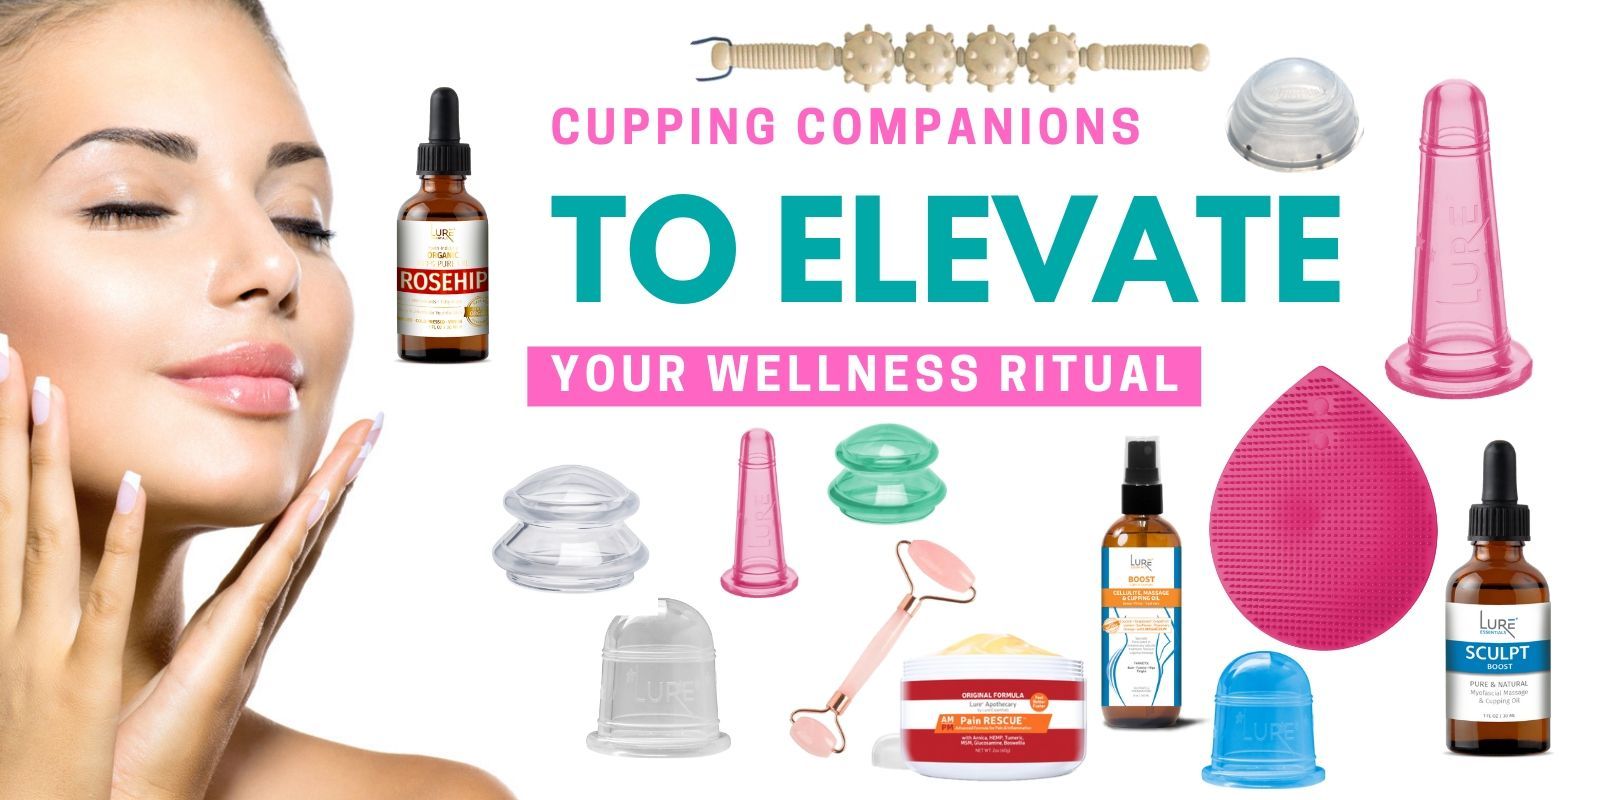 Cupping Companions to Elevate Your Wellness Ritual - Lure Essentials